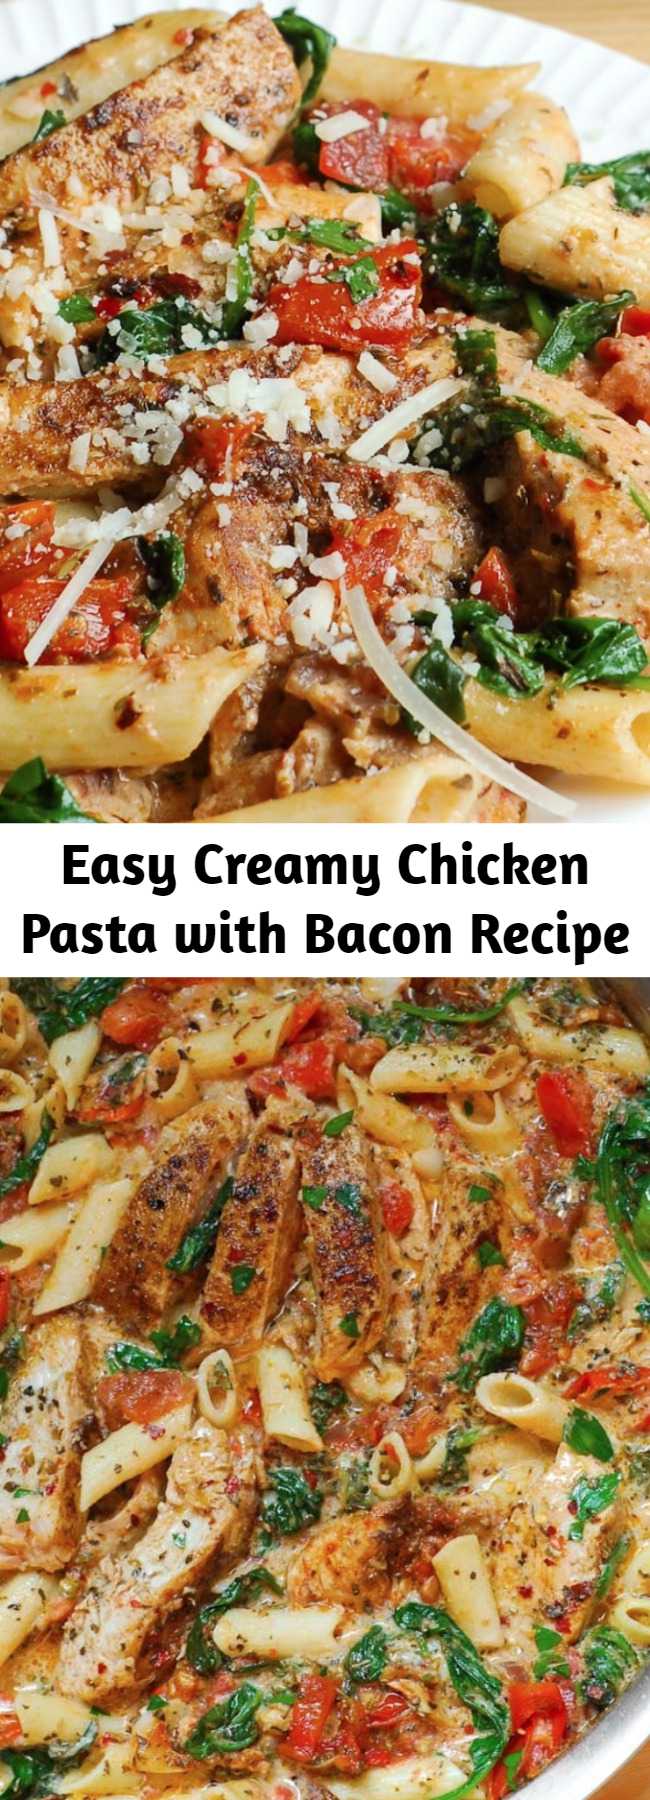 Easy Creamy Chicken Pasta with Bacon Recipe - Creamy chicken pasta with bacon is easy to make weeknight one pot pasta dish! With only 30 minutes of total work, this chicken dinner recipe is simple, fast and delicious! Full of tender chicken, spinach, tomatoes, and bacon! #chickenpasta #bacon #easydinner #30minutemeal